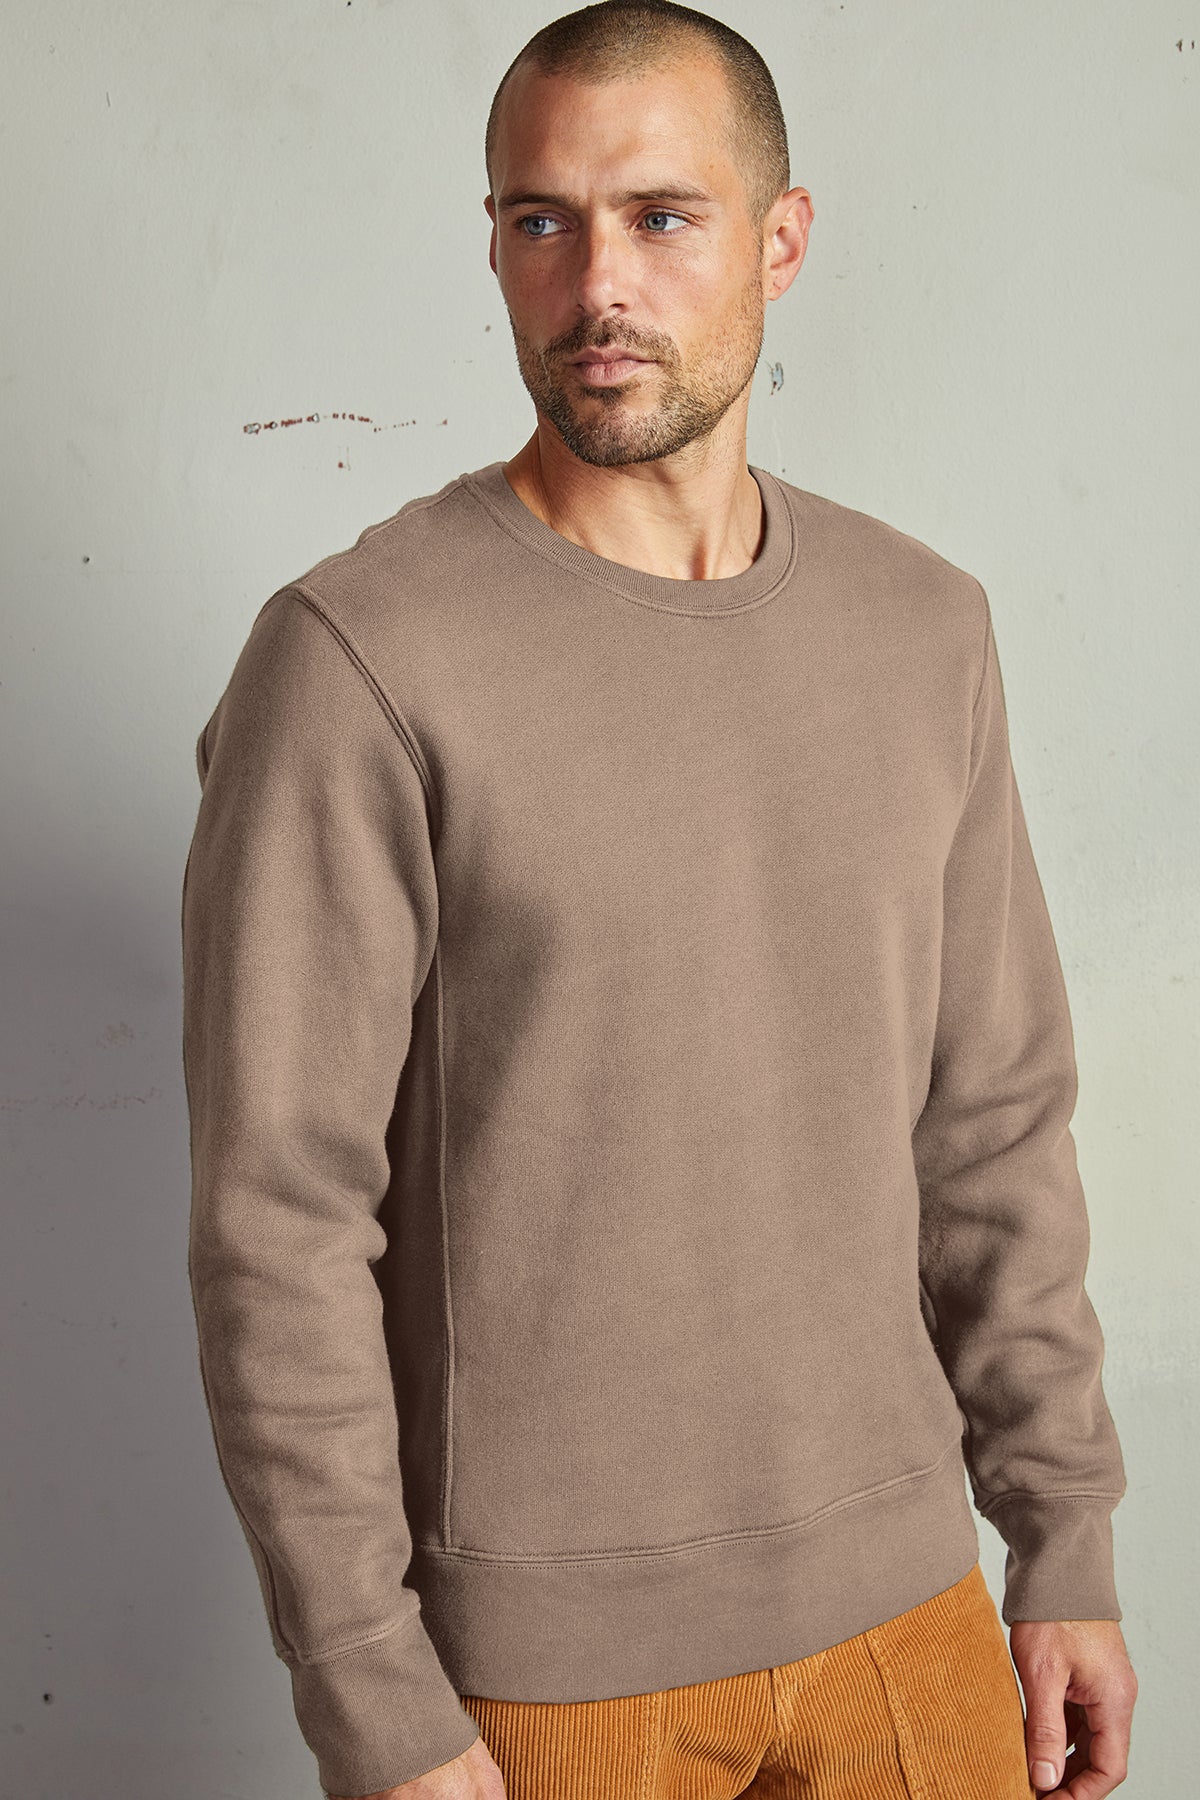 A man in a Velvet by Graham & Spencer King Crew Neck Sweatshirt and brown pants with clean lines, perfect for everyday minimal style.-14904539611329